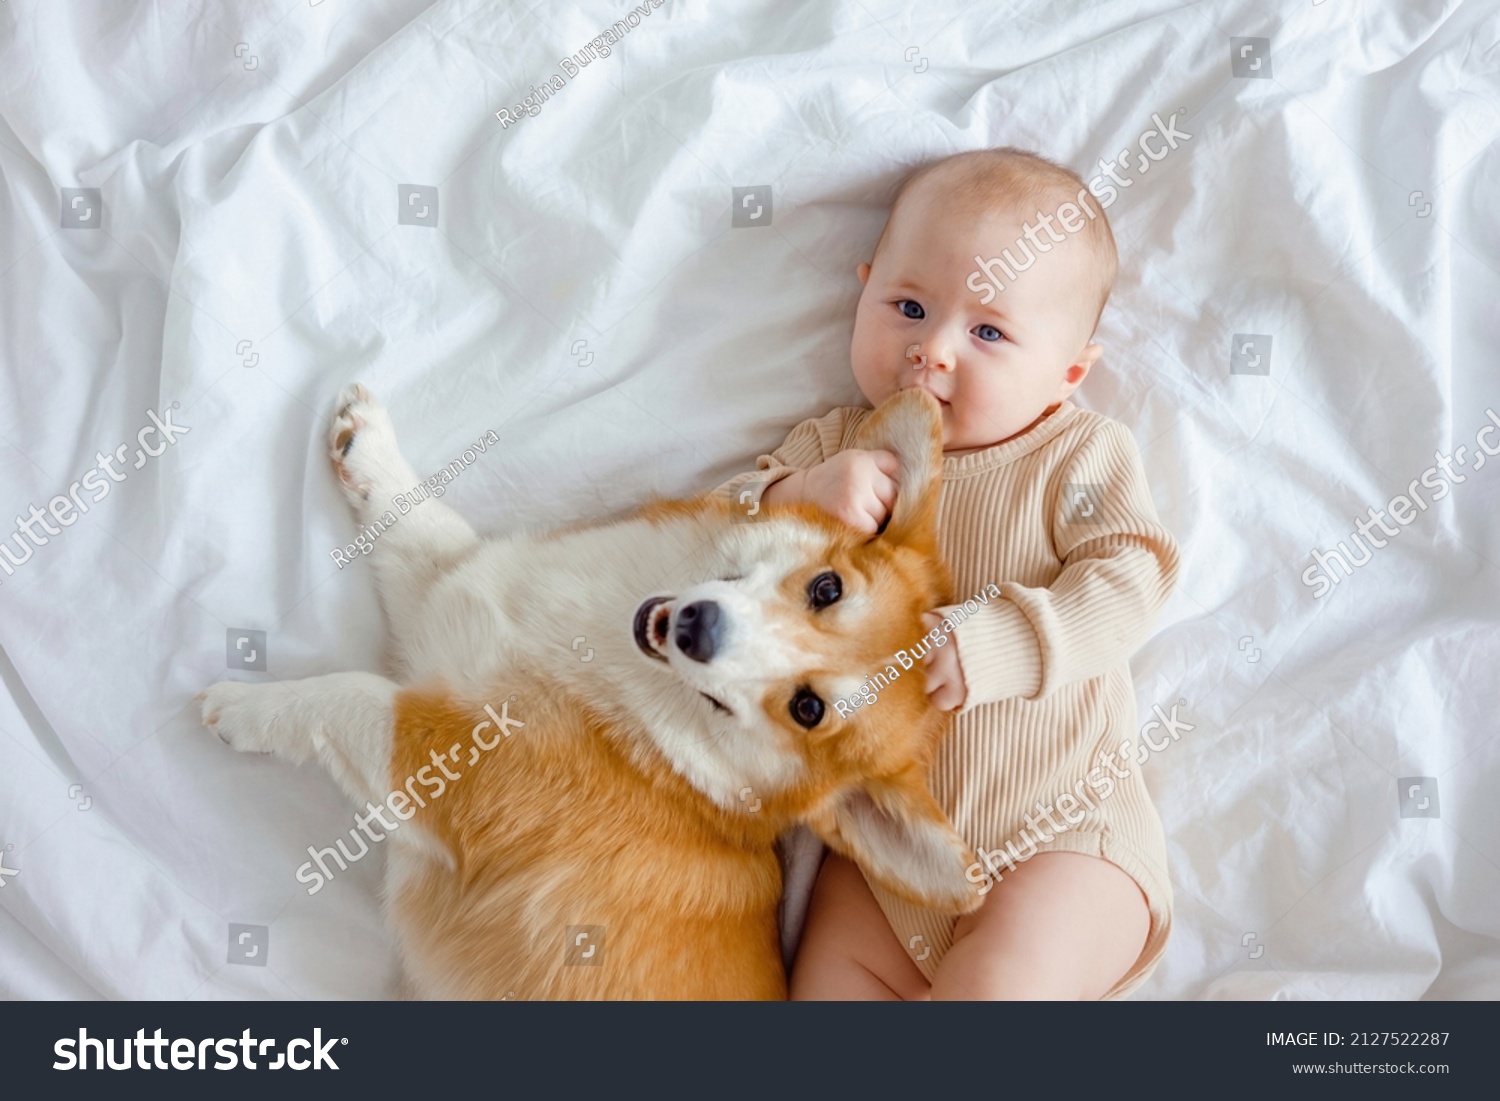 An infant and ginger corgi pembroke laying on a white sheet. The concept of relationships between baby and dog. Fur allergy. Pets in family with newborn. Baby holding dog's mazzle. Family members. #2127522287